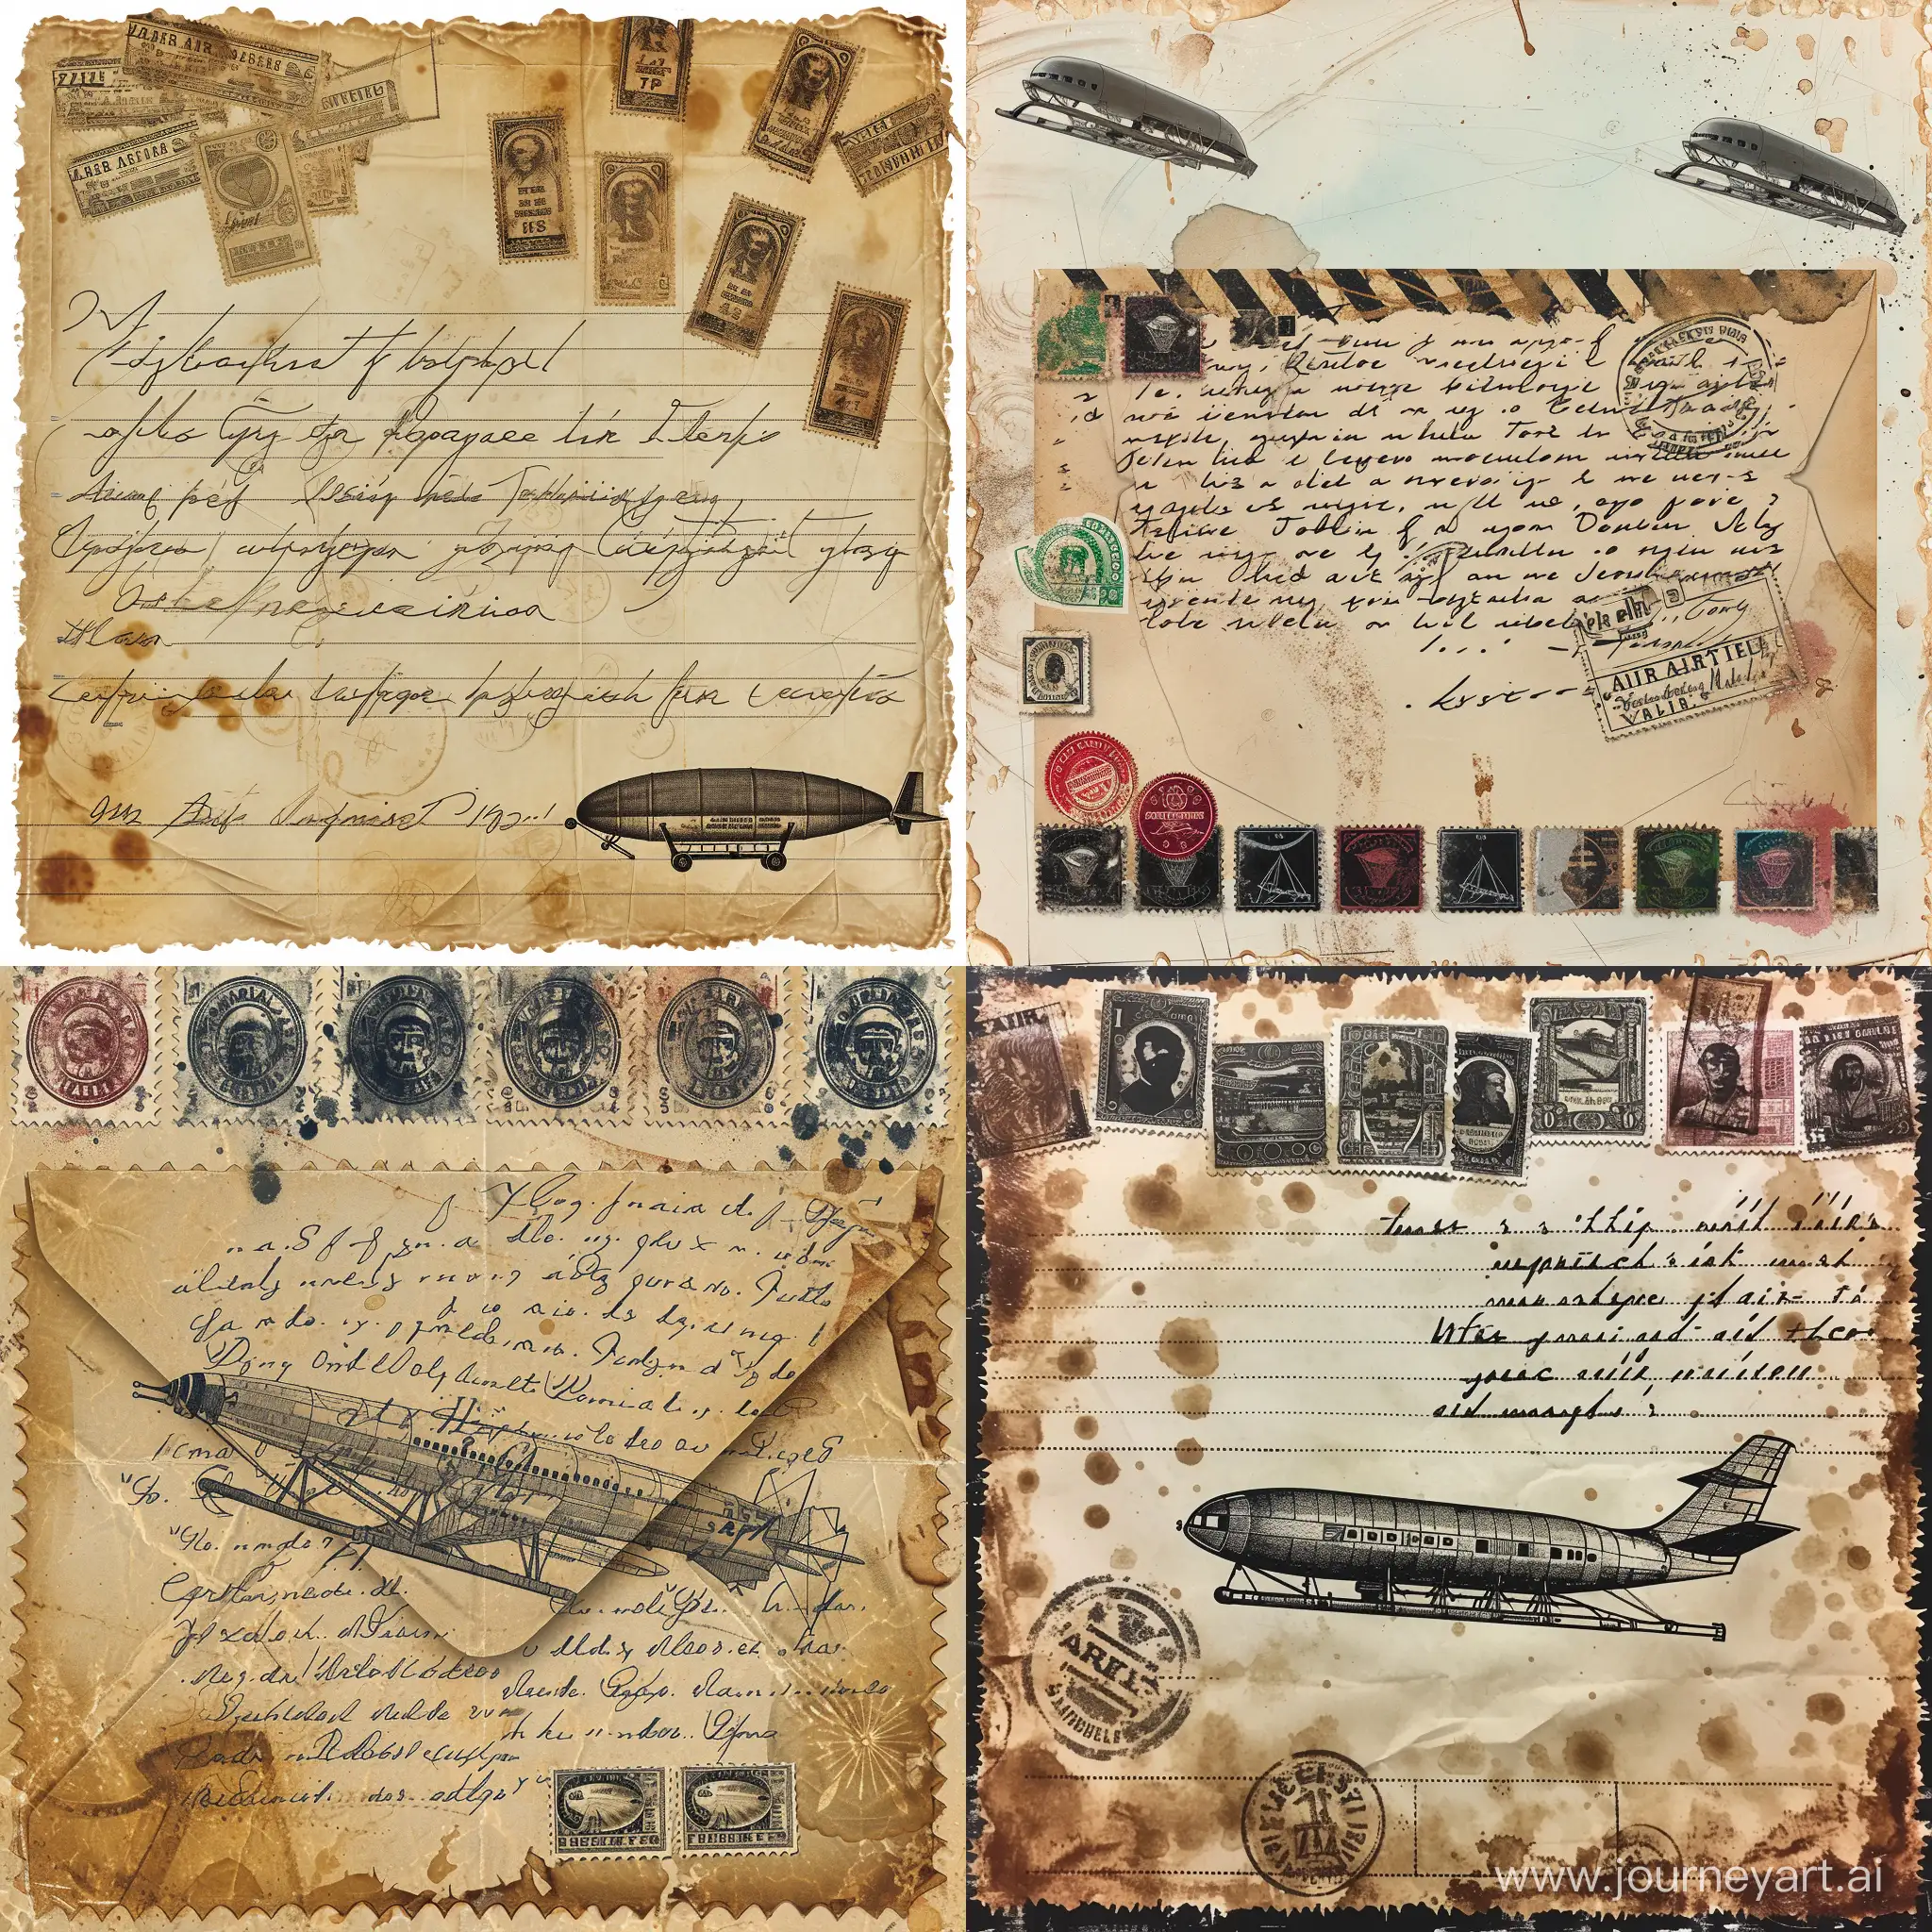 vintage, an air mail envelope with handwritten text, postage stamps, a zeppelin, add some stains